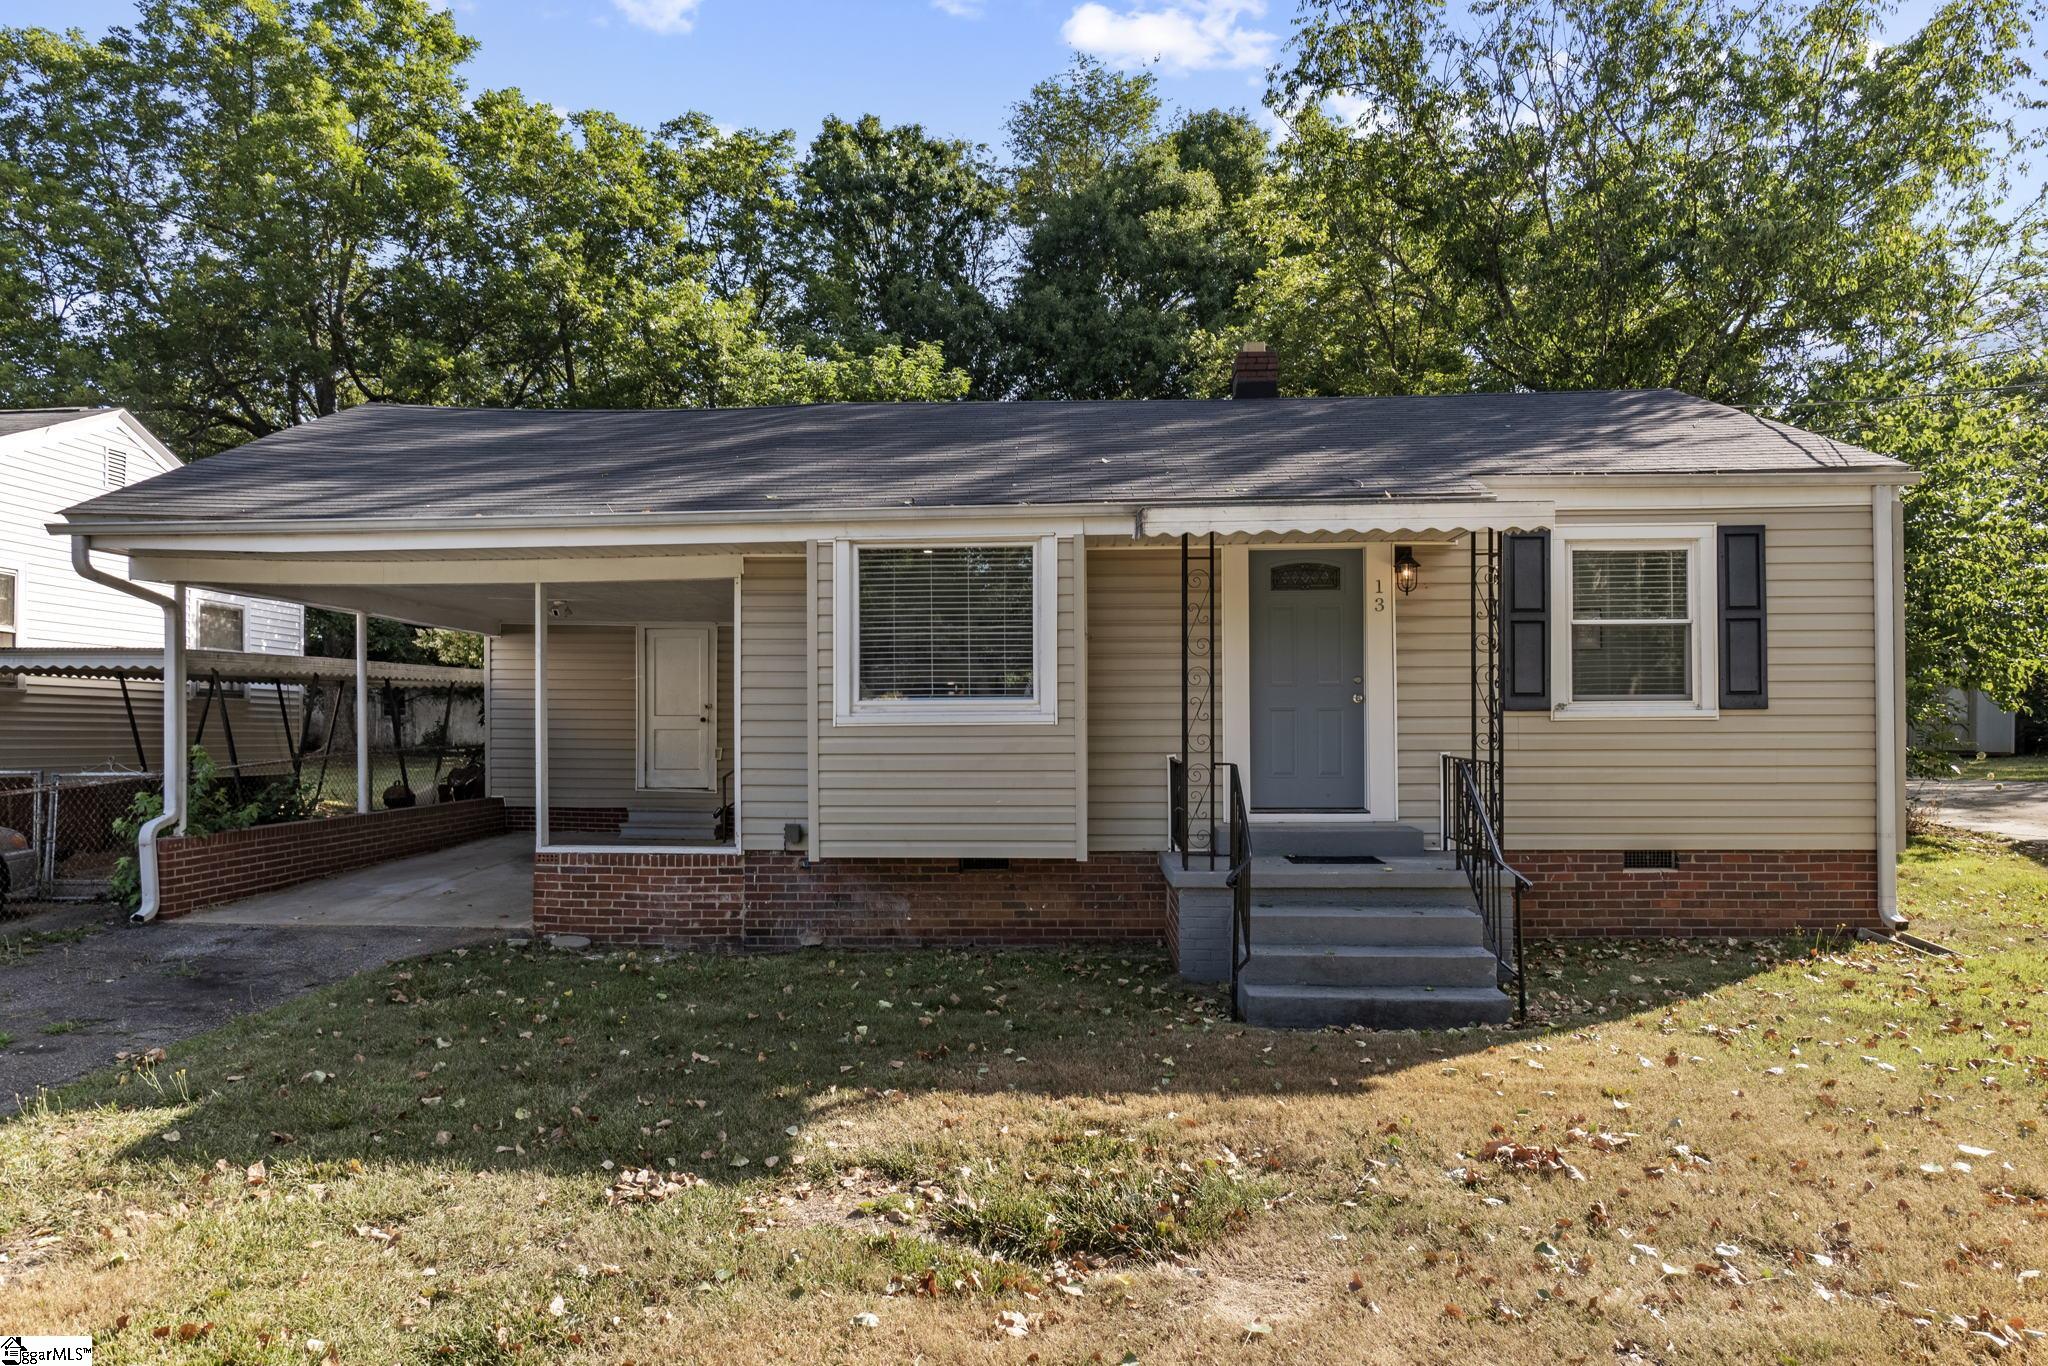 Welcome to your charming retreat just minutes from downtown Greenville! This recently remodeled hous